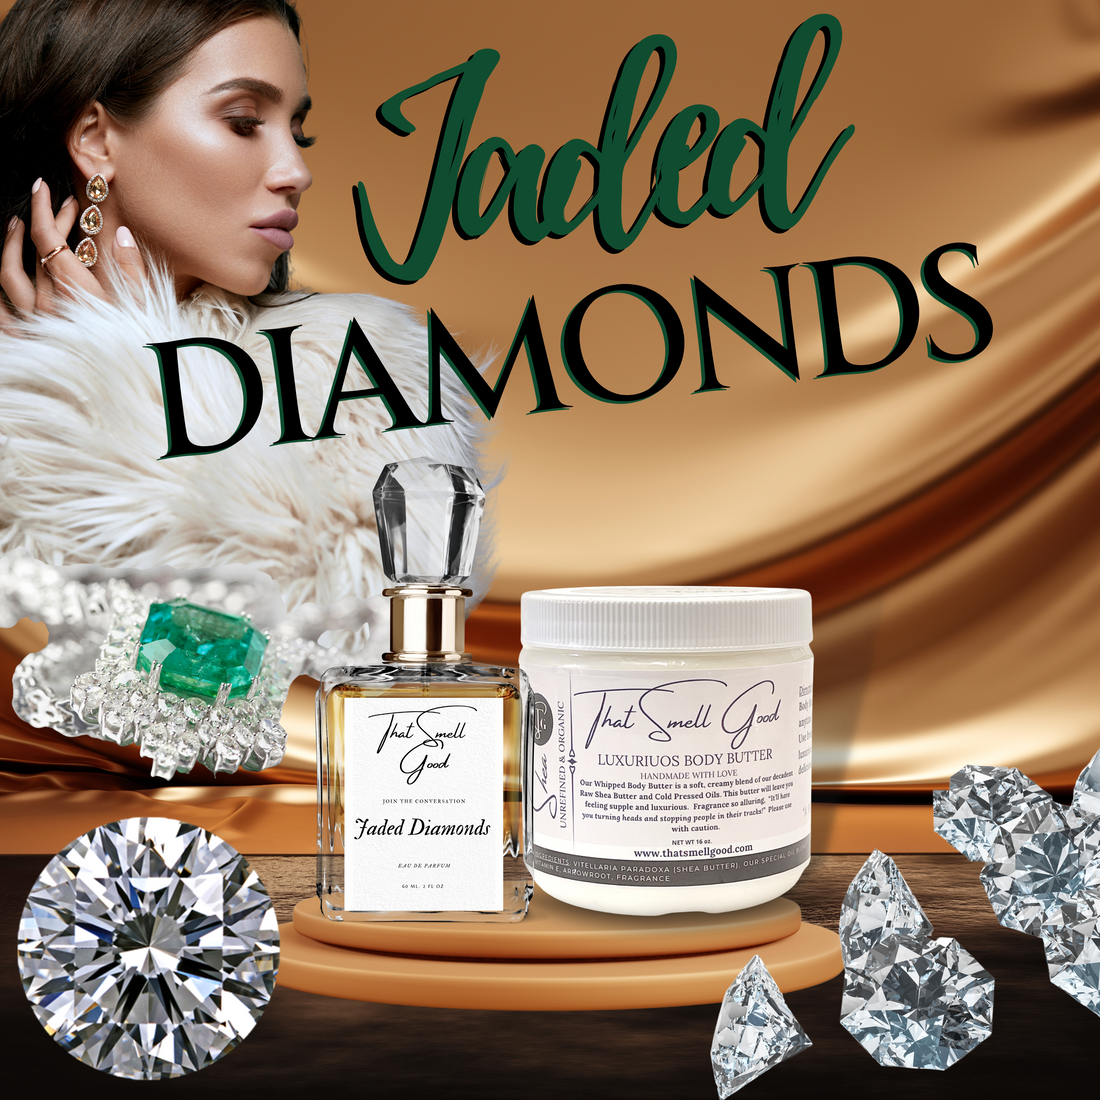 Jaded Diamonds Body Butter and Perfume